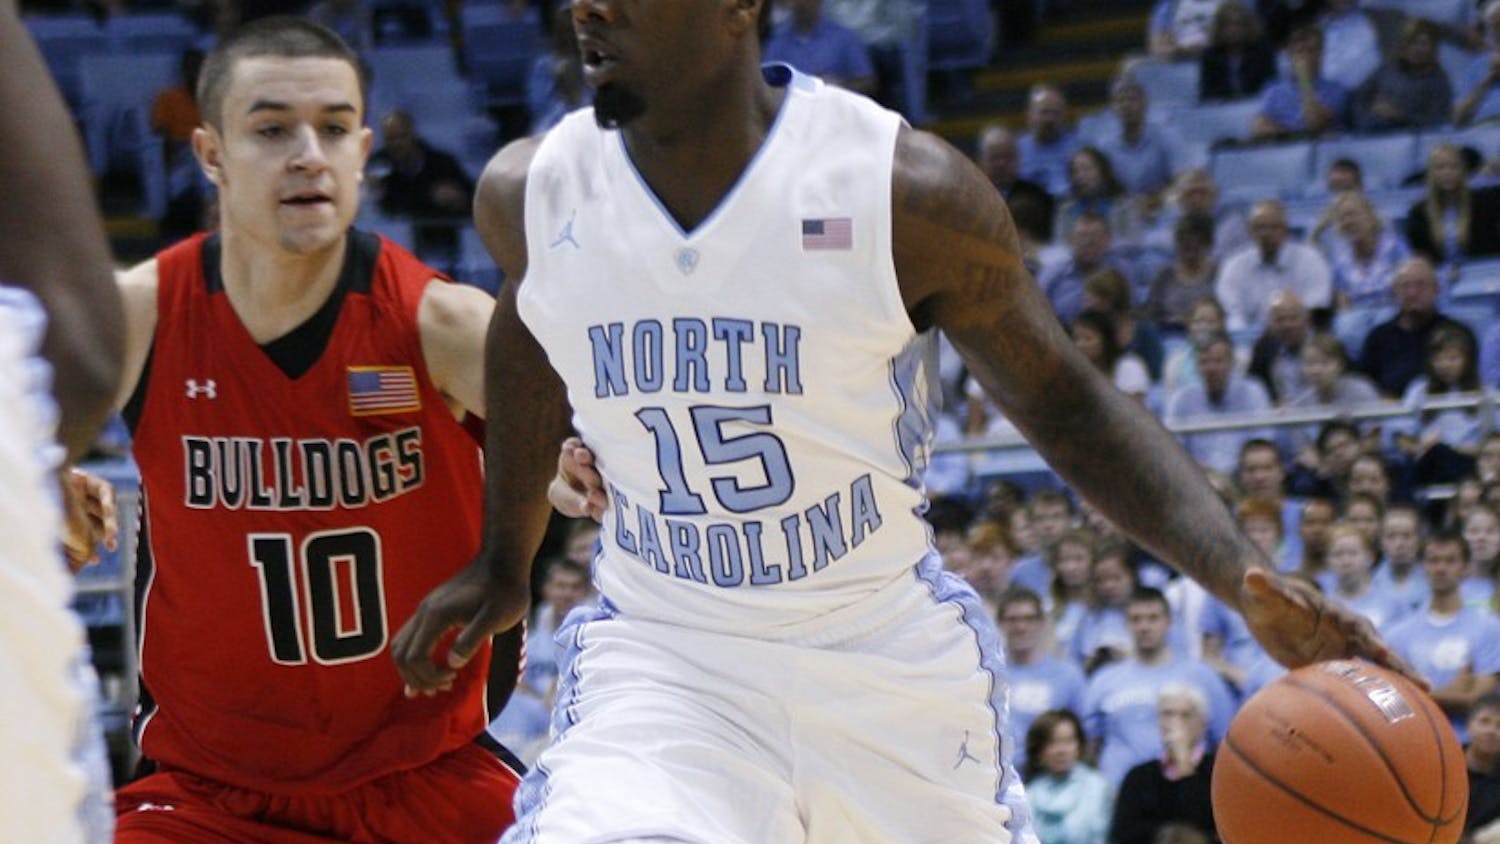 	The Tar Heels will have to face the top-ranked Hoosiers without P.J. Hairston, due to an injury.